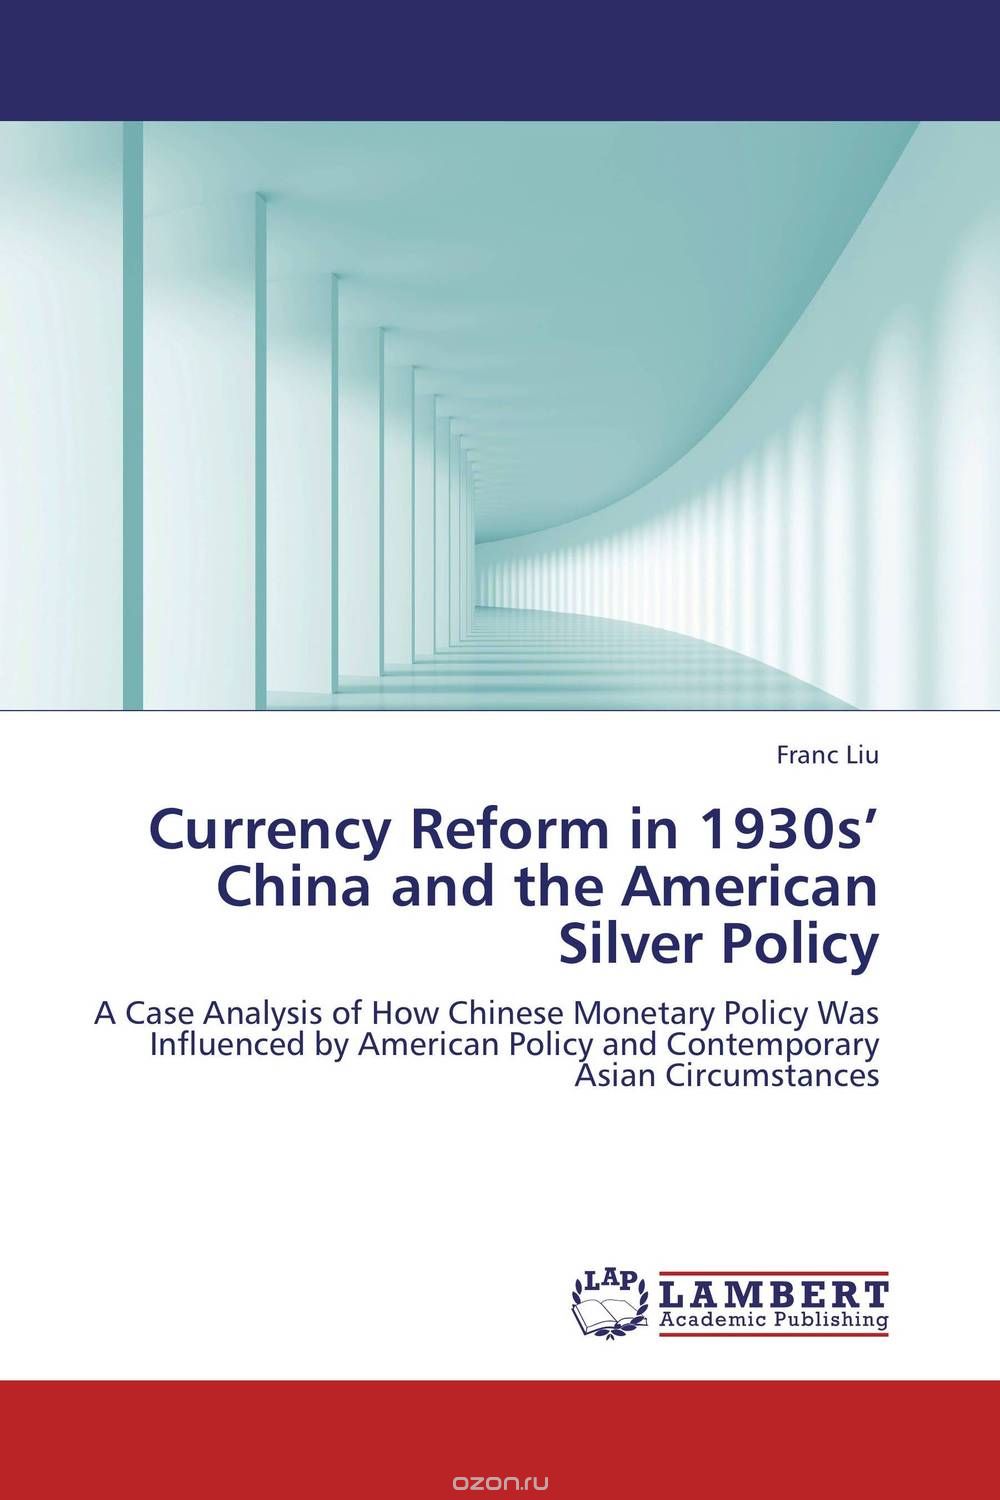 Currency Reform in 1930s’ China and the American Silver Policy